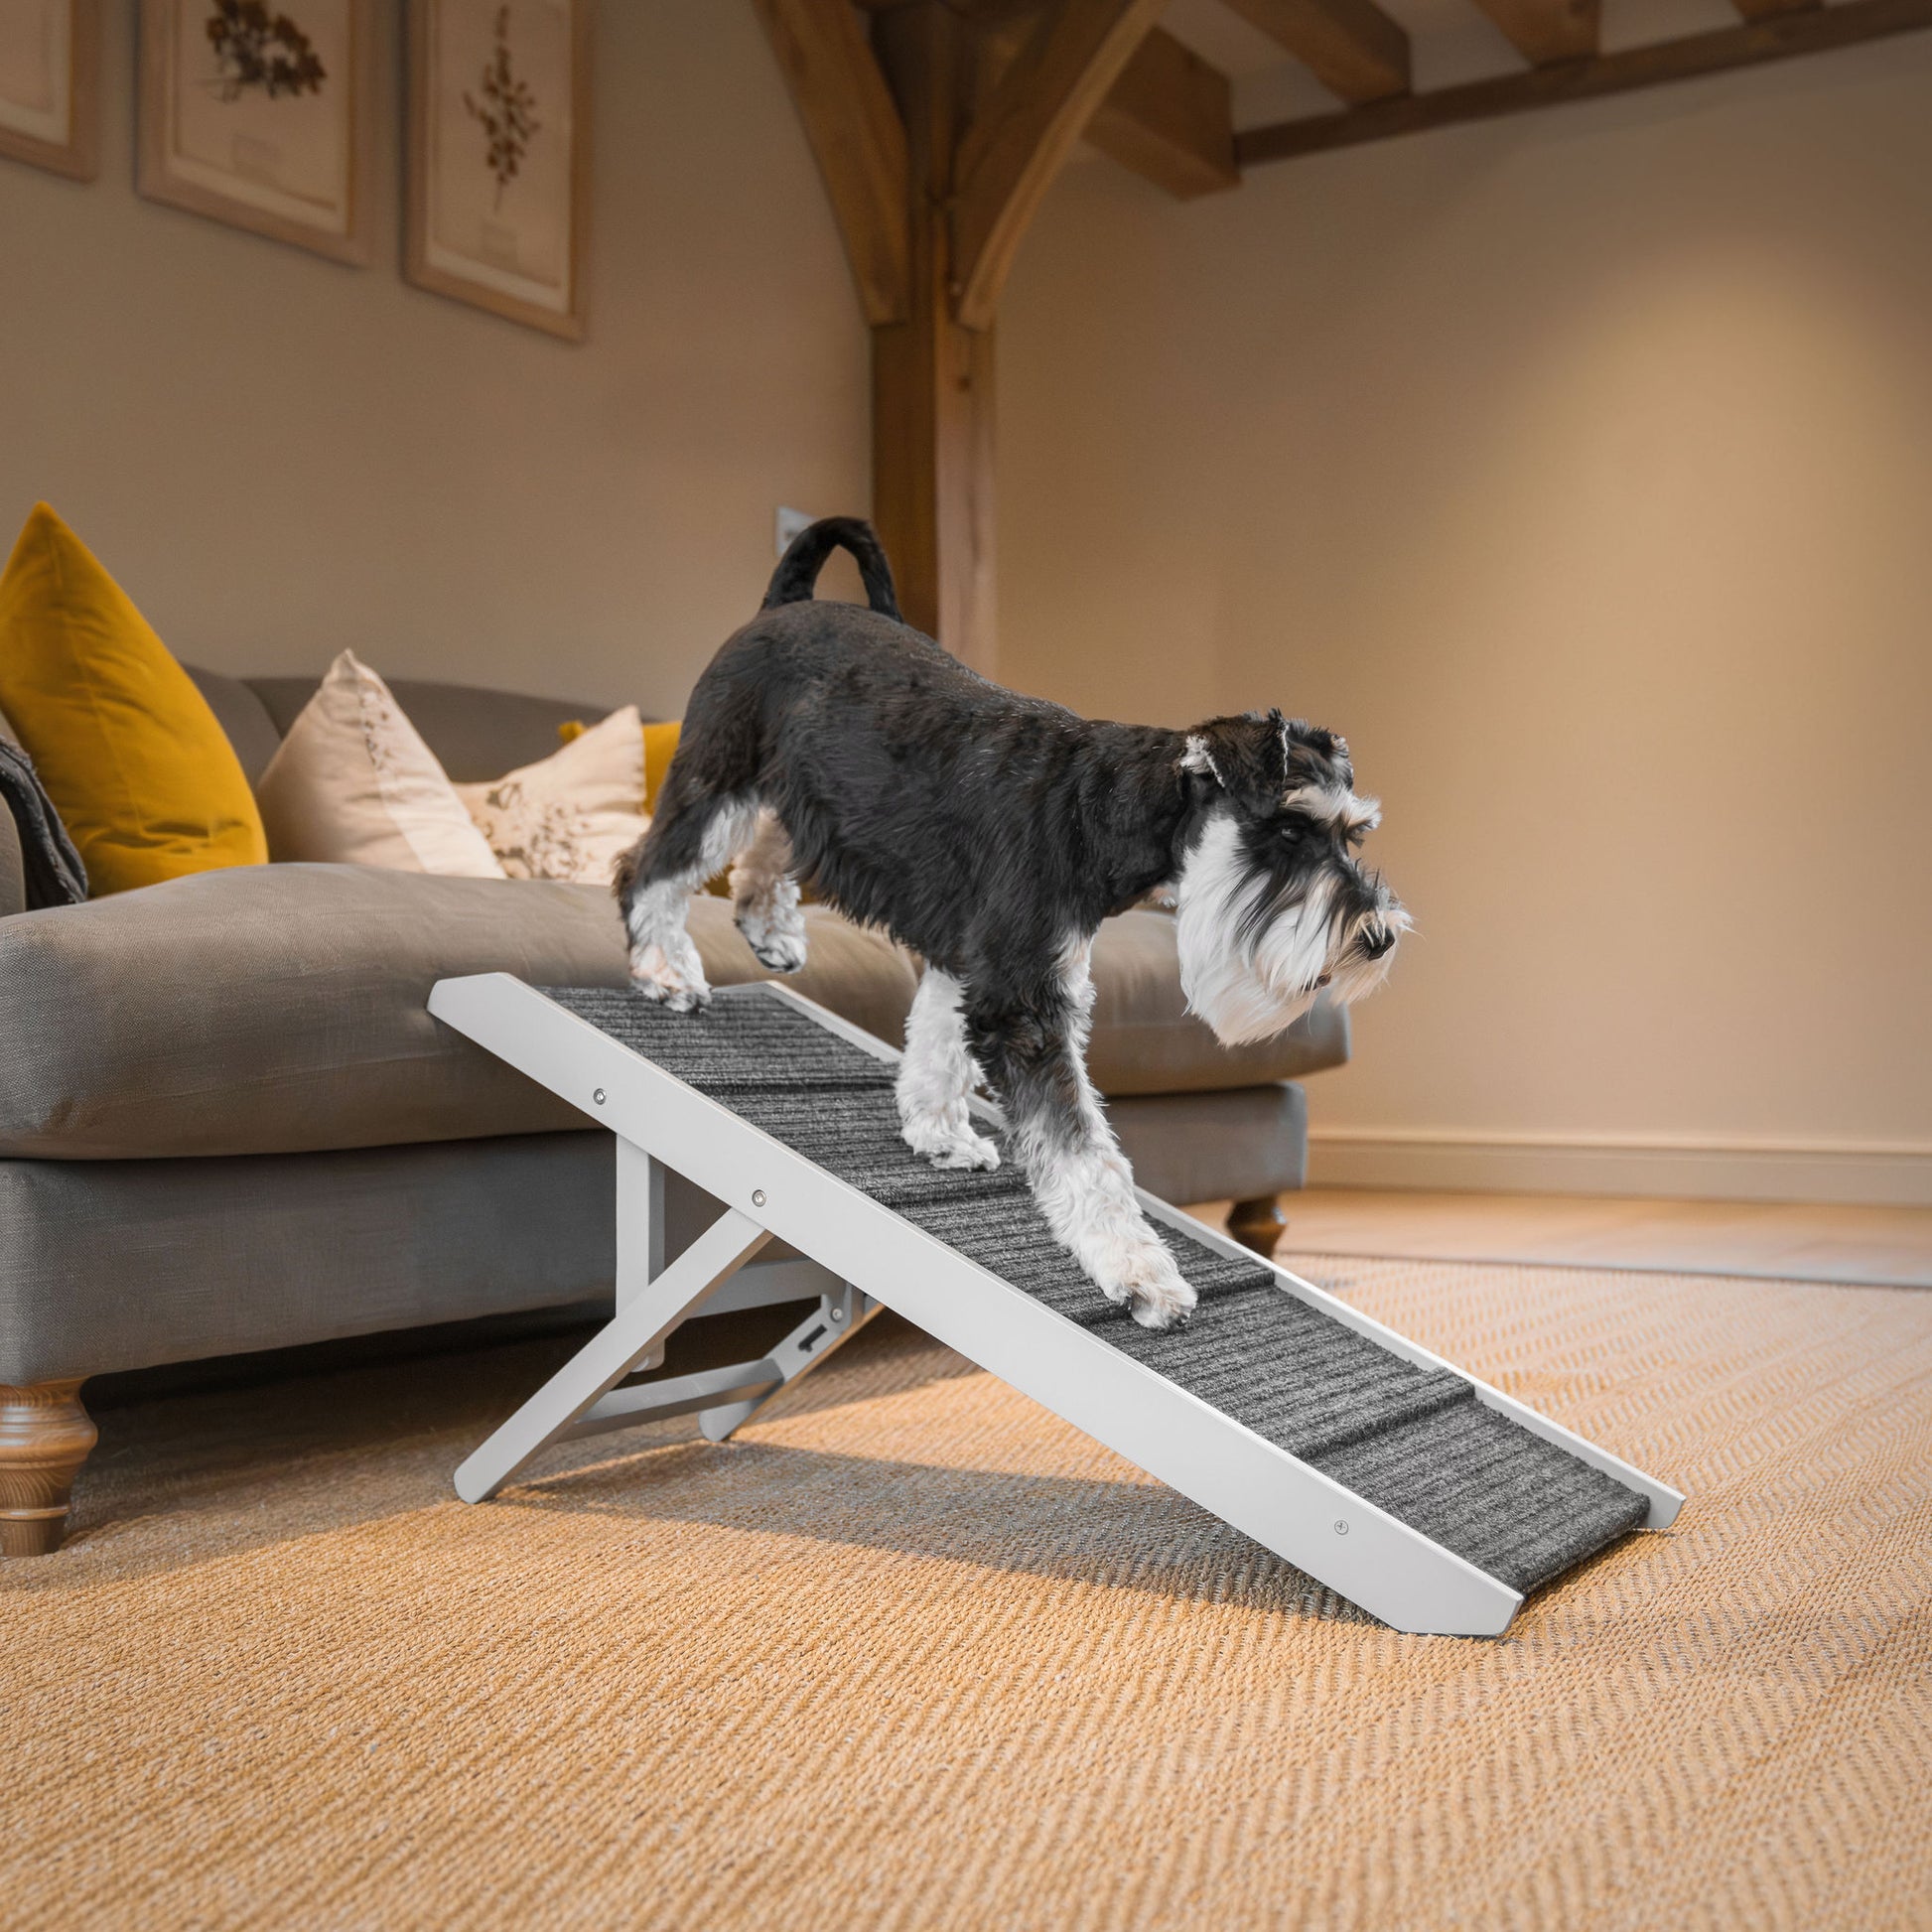 Discover the perfect pet furniture to help aid your furry friend, our super-strong dog ramp provides the ultimate comfort when climbing to join you on the couch! Featuring grooves for extra grip! Perfect for injured pets, puppy training and elderly dogs! Available now in 2 stylish colors at Lords & Labradors US